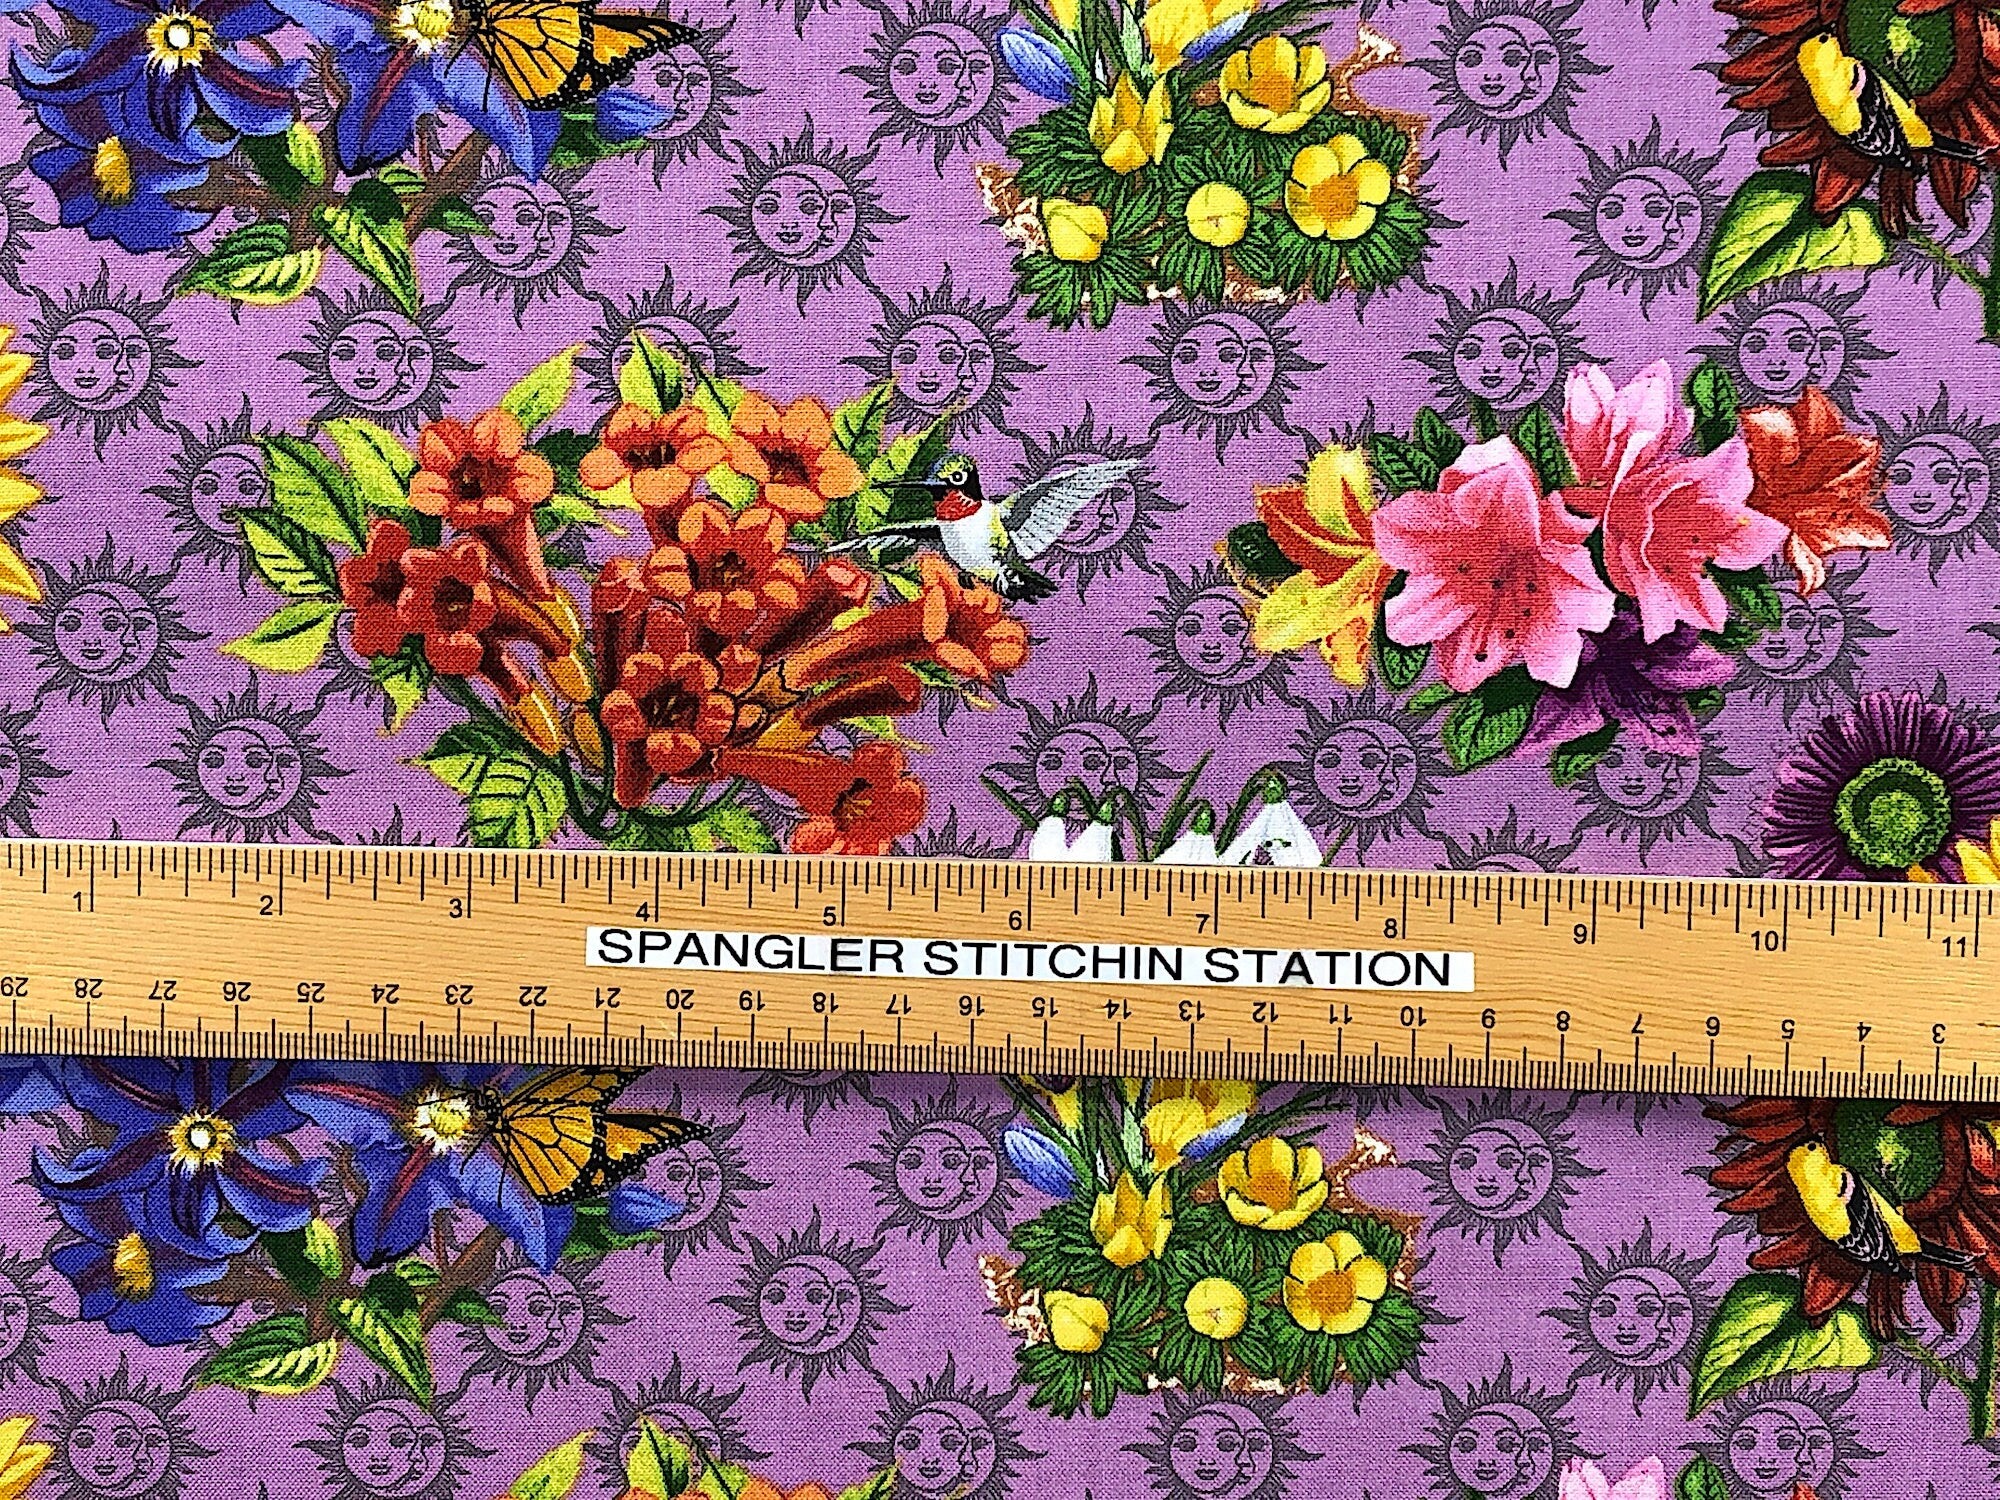 Ruler on fabric to show width. 